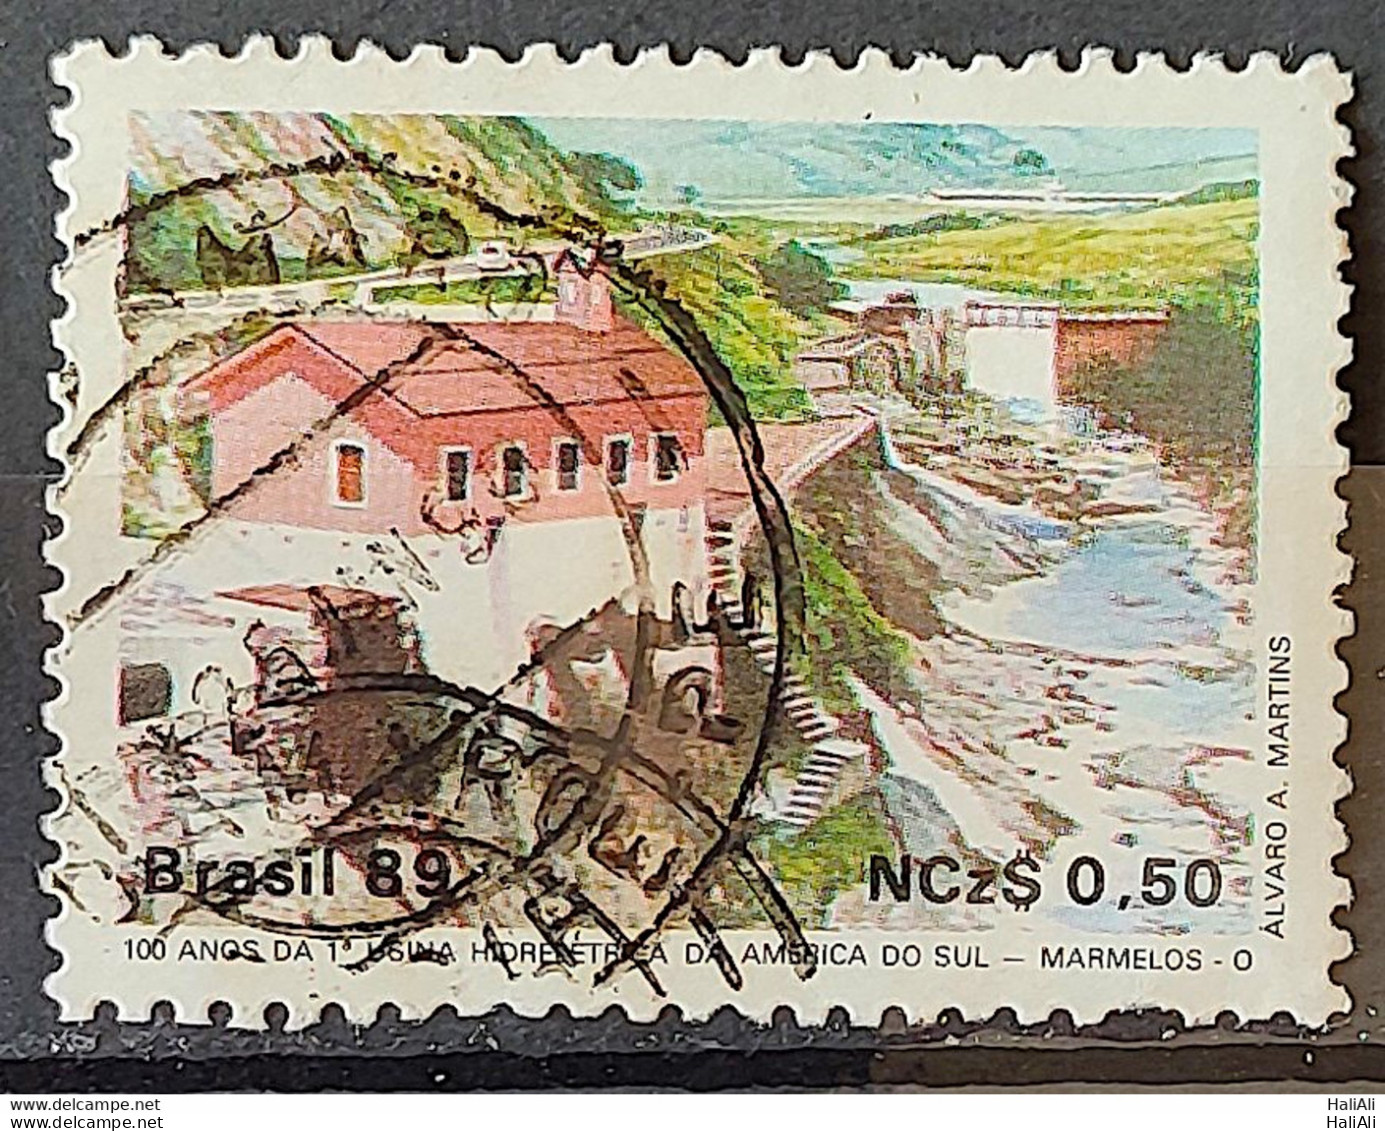 C 1644 Brazil Stamp 100 Years Hydroelectric Marmelos Energy Electricity Juiz De Fora 1989 Circulated 18 - Gebraucht